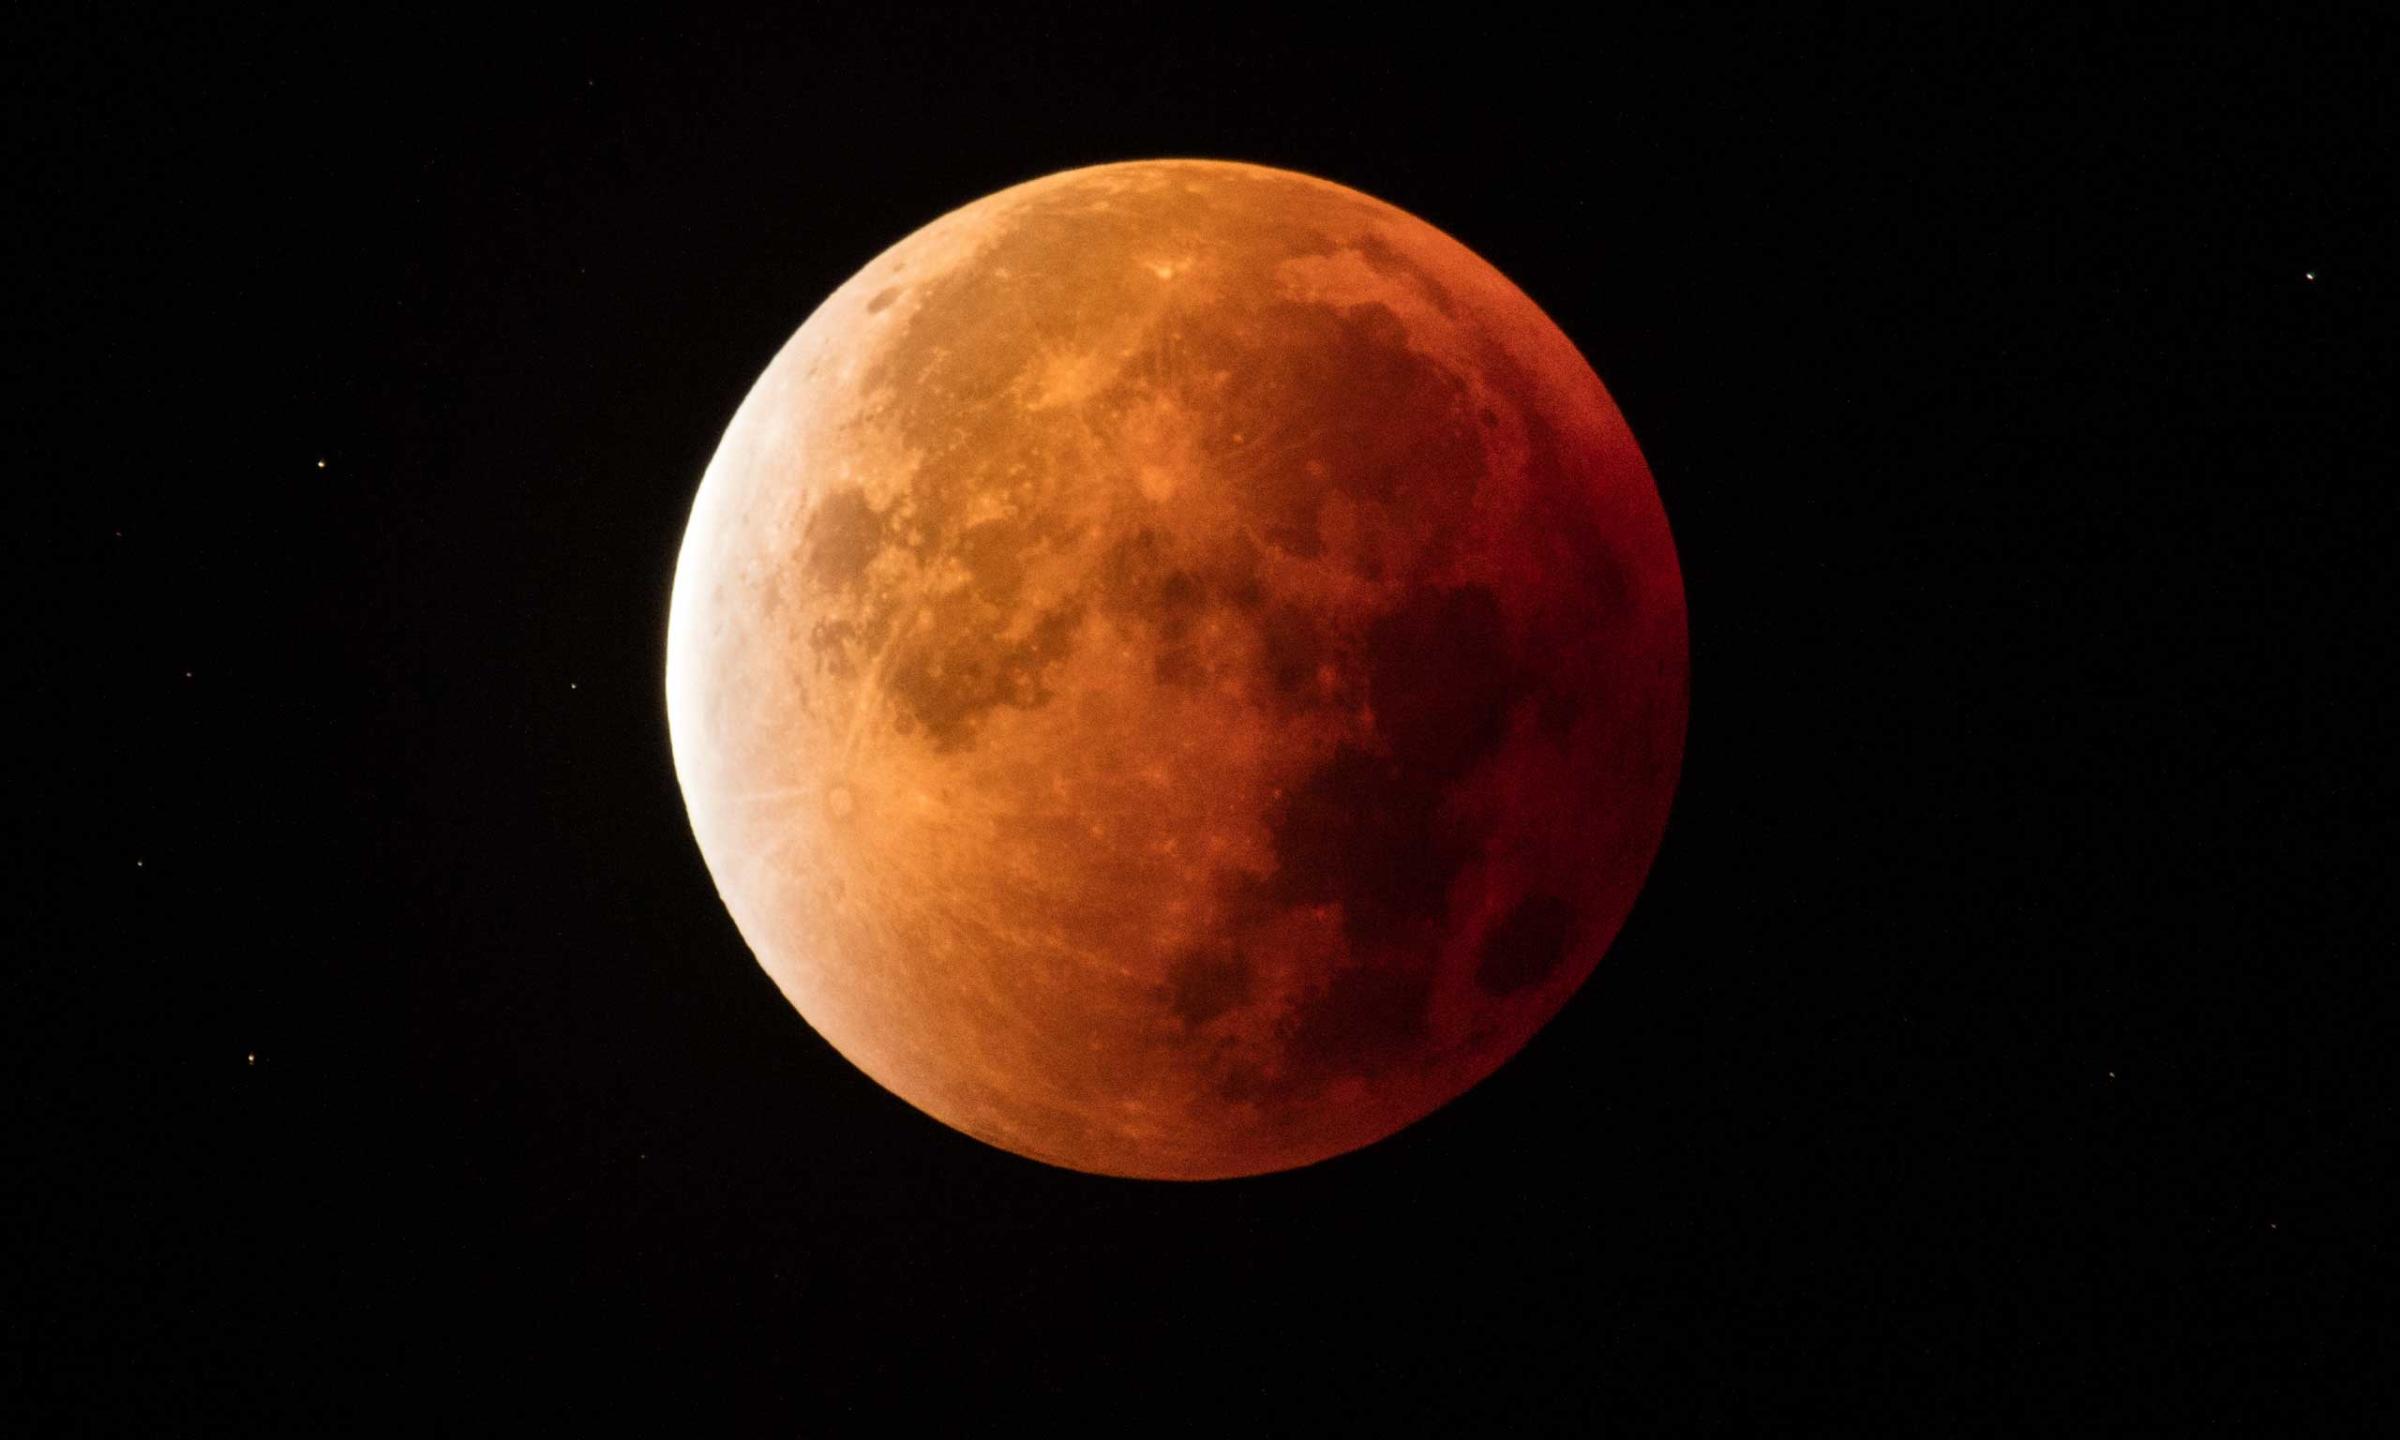 The once in a generation supermoon total lunar eclipse viewed from Glastonbury, England, on Sept. 28, 2015.